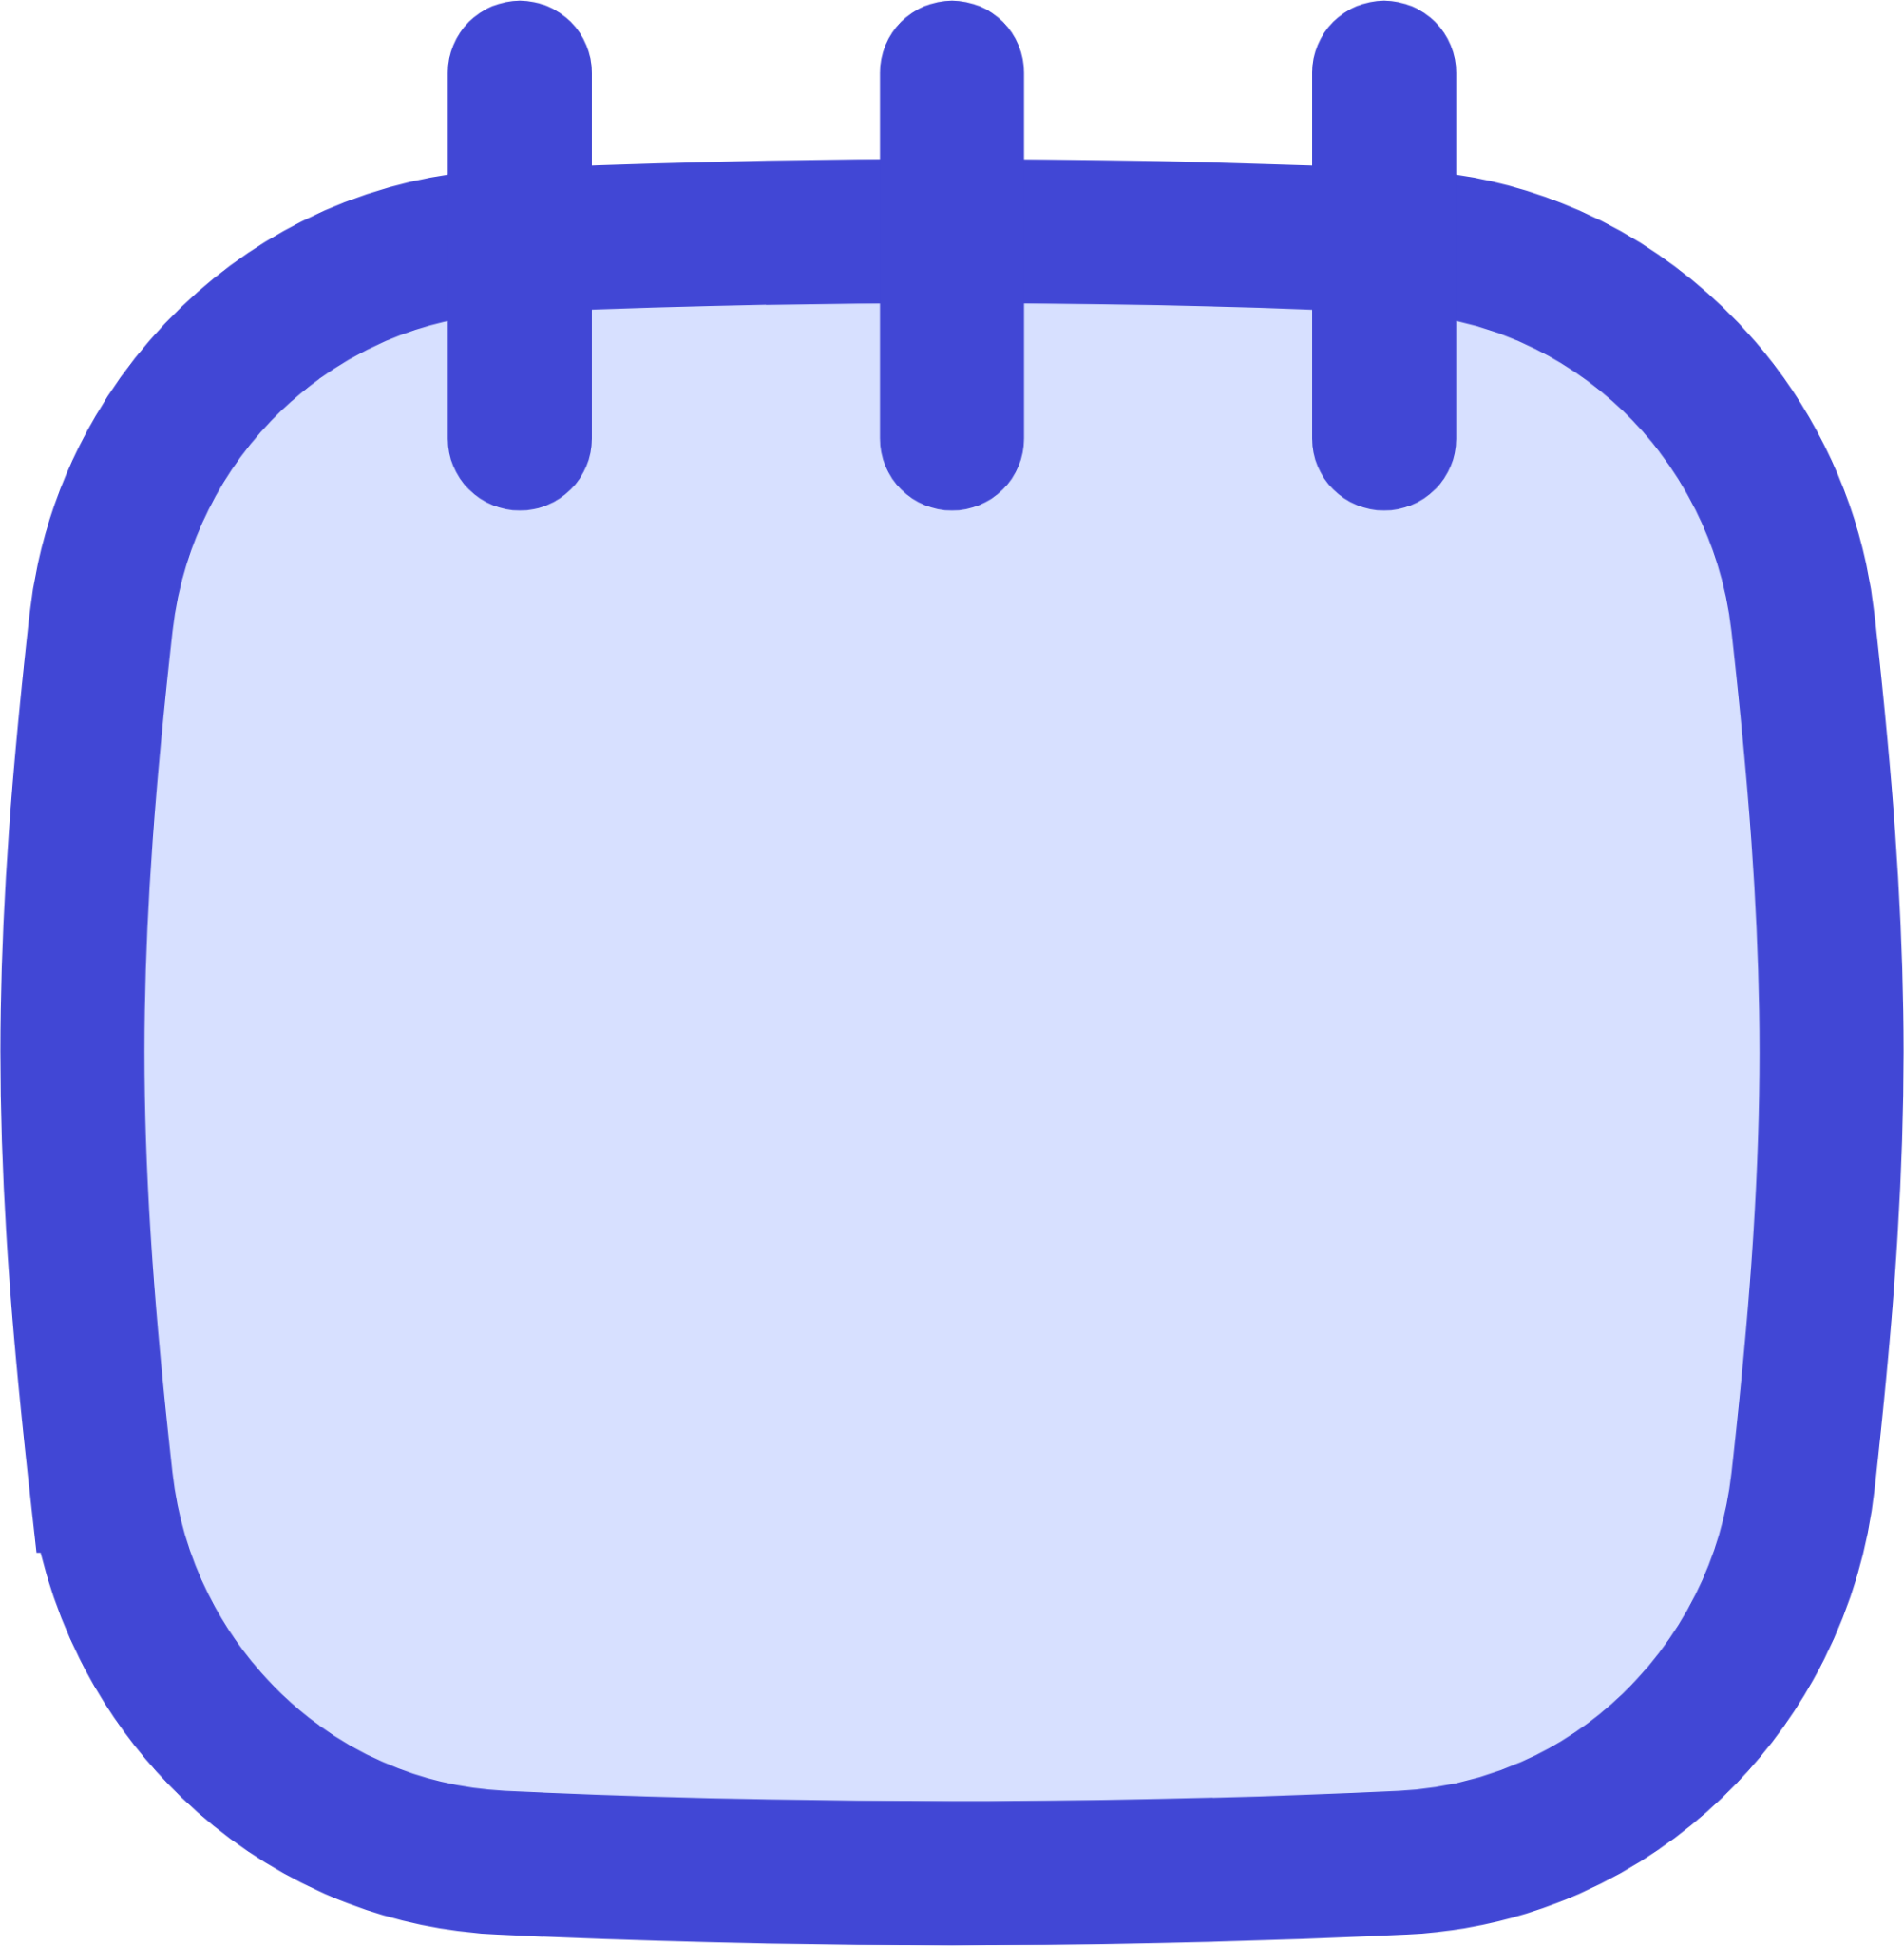 content note pad icon